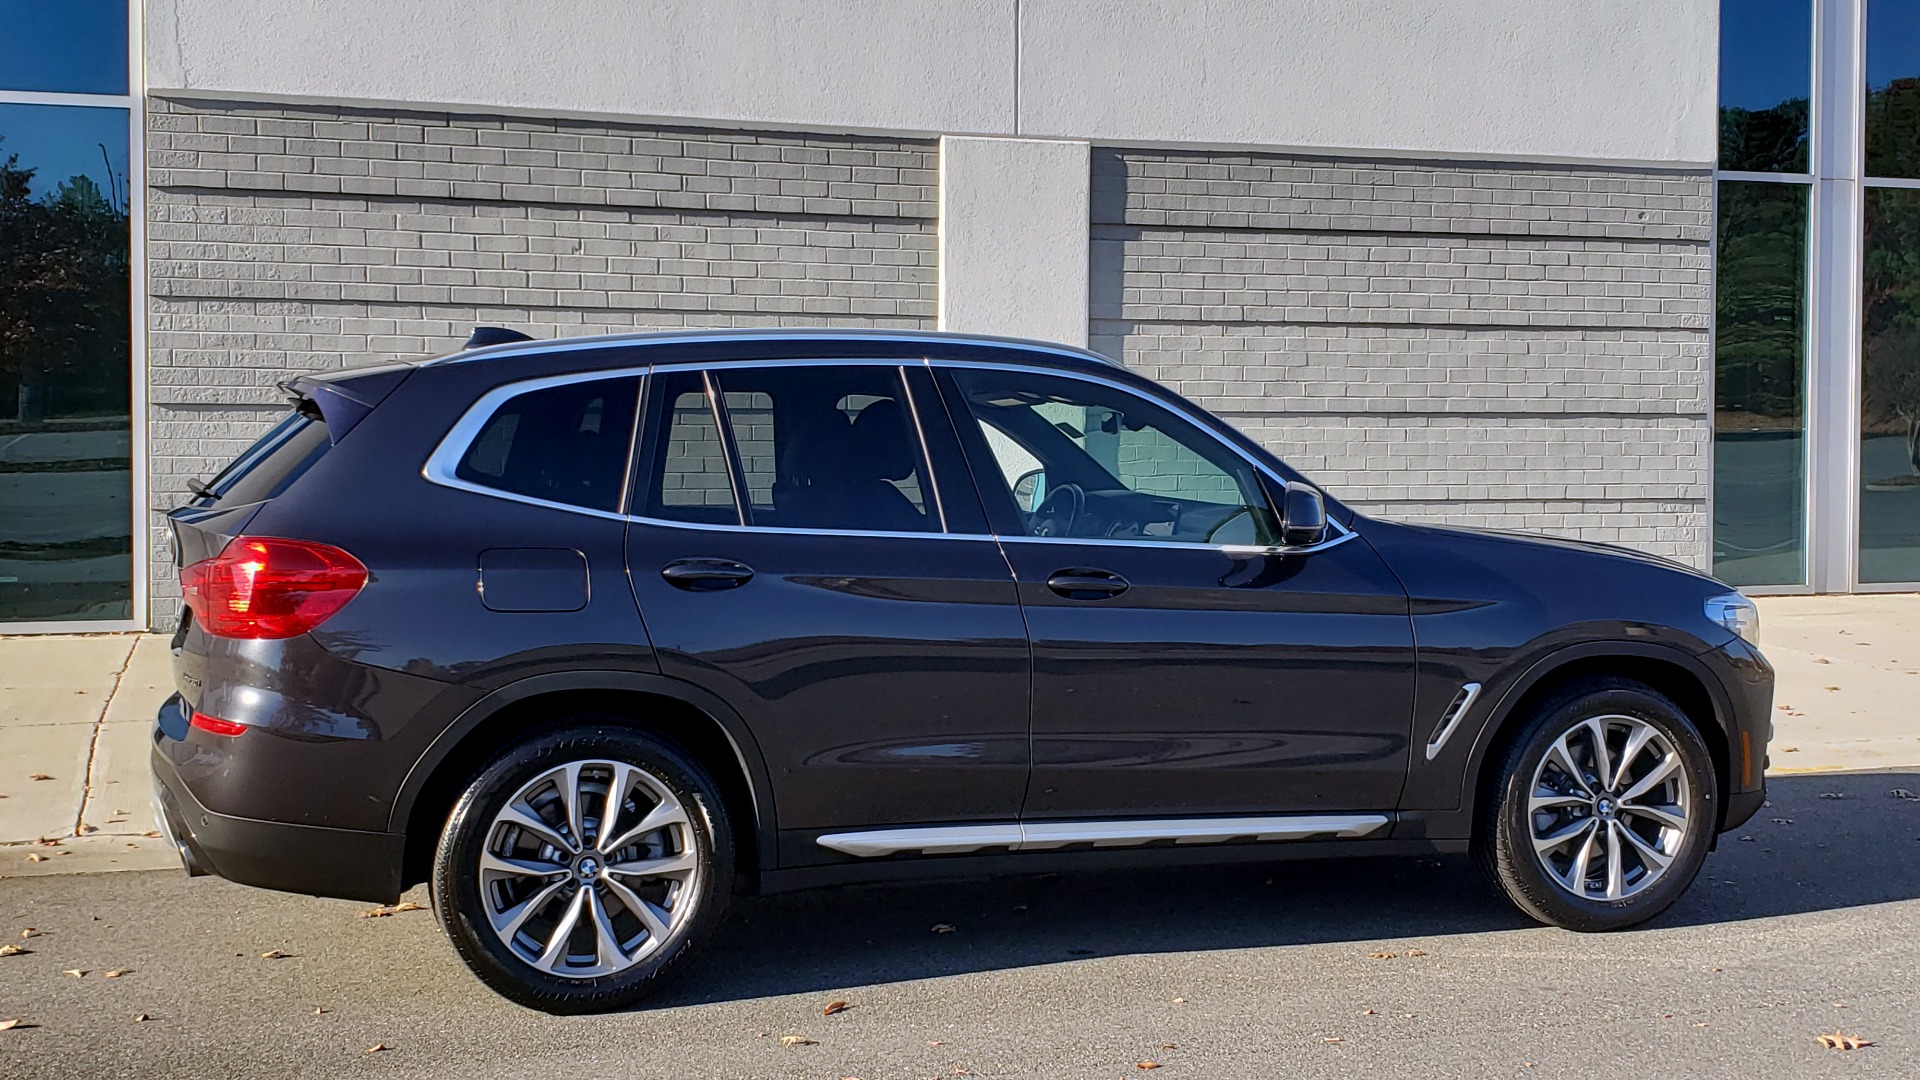 Used 2018 BMW X3 XDRIVE30I / NAV / PARK ASST / PANO-ROOF / HTD STS / REARVIEW for sale Sold at Formula Imports in Charlotte NC 28227 8